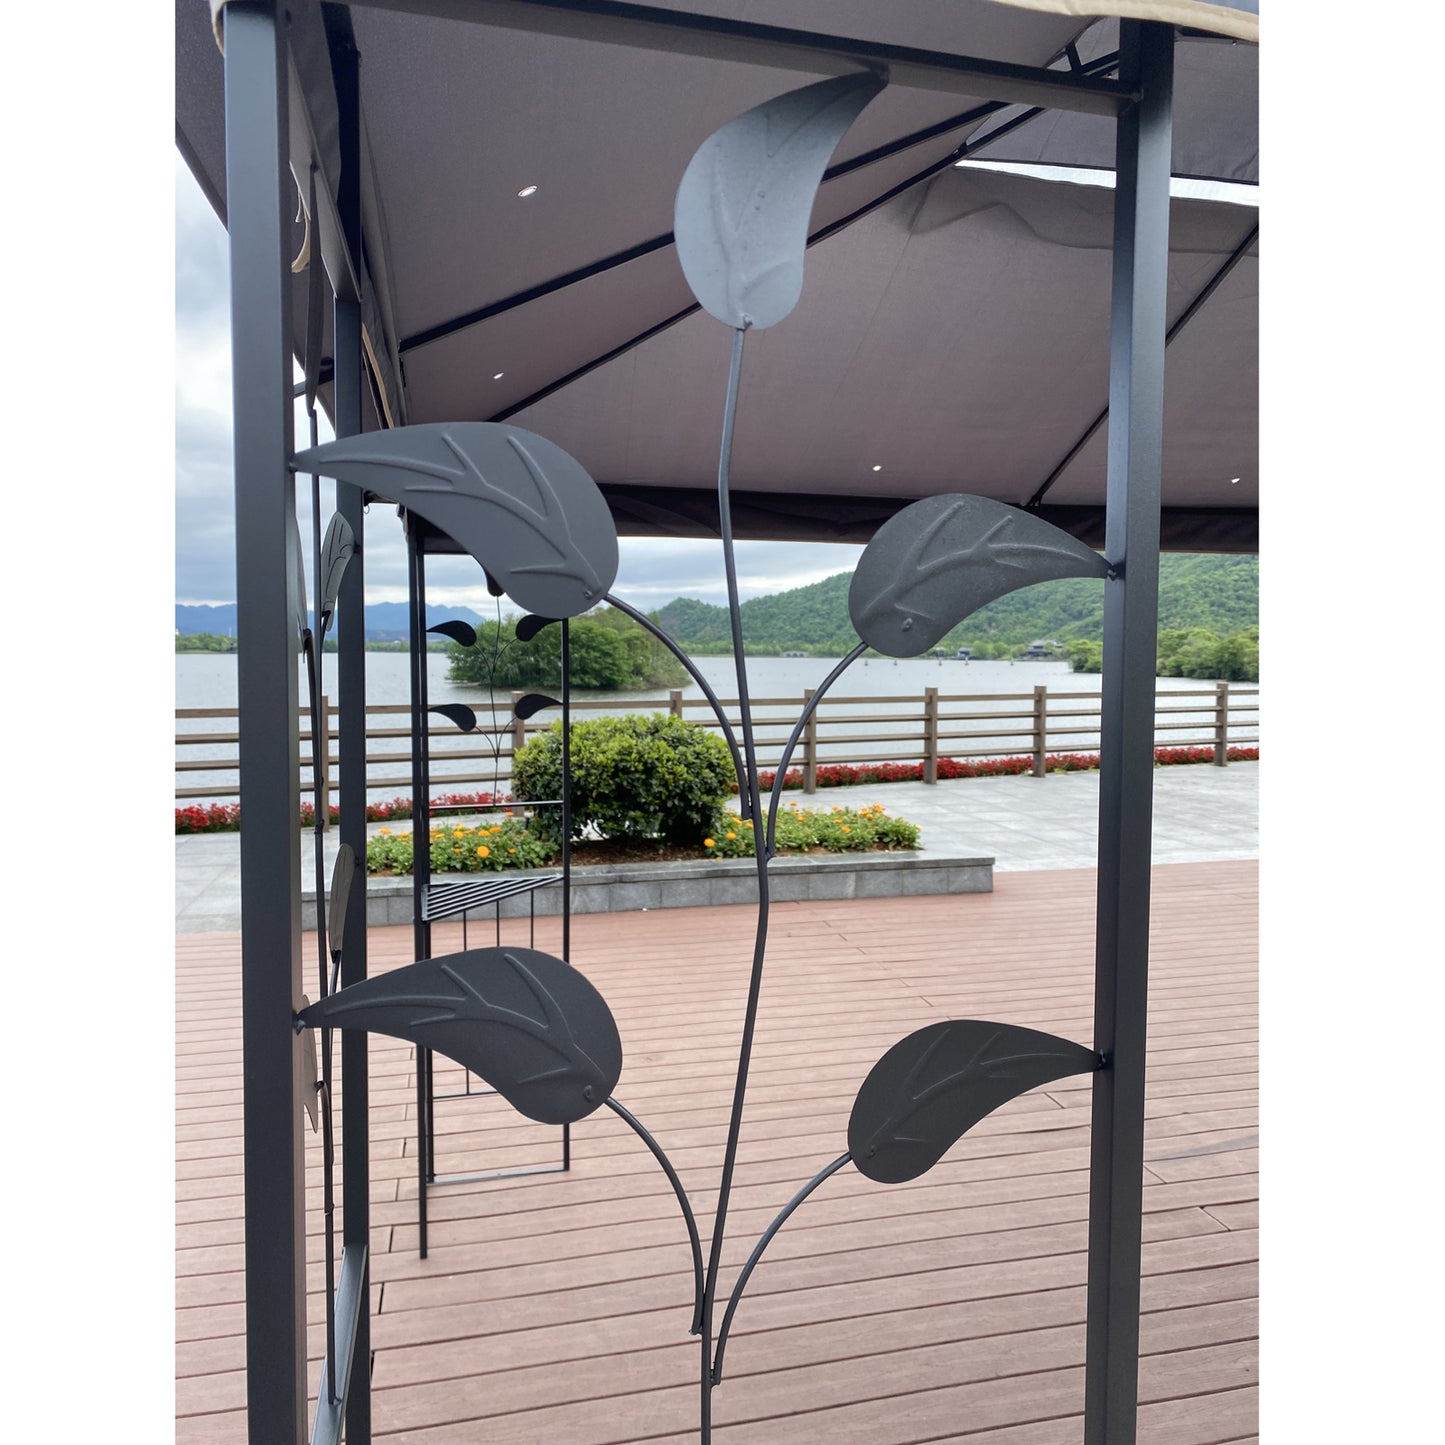 13x10 Outdoor Patio Gazebo Canopy Tent With Ventilated Double Roof And Mosquito net,Gray Top